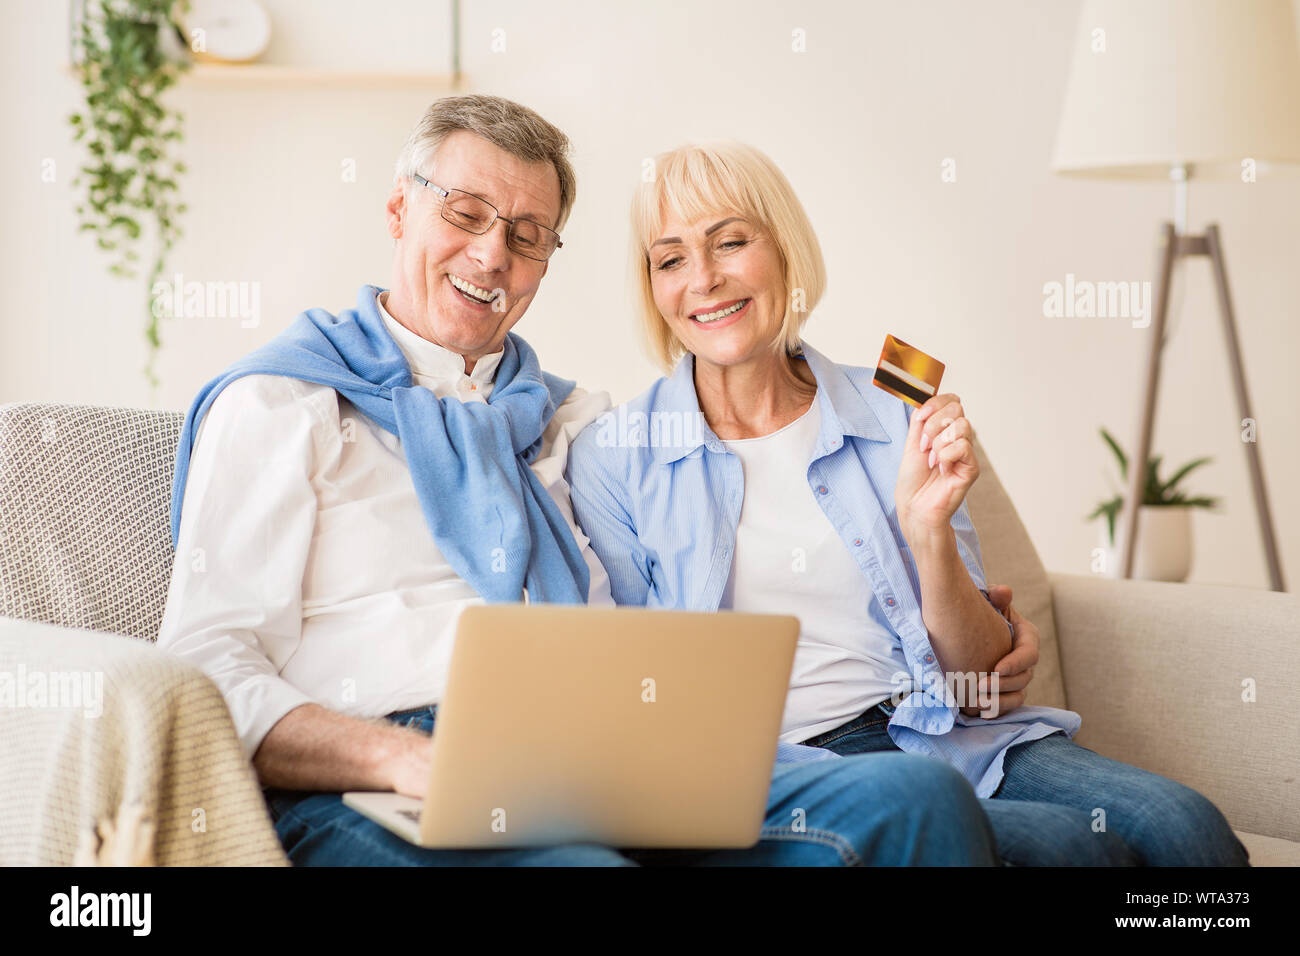 Excited older couple doing online shopping on laptop Stock Photo